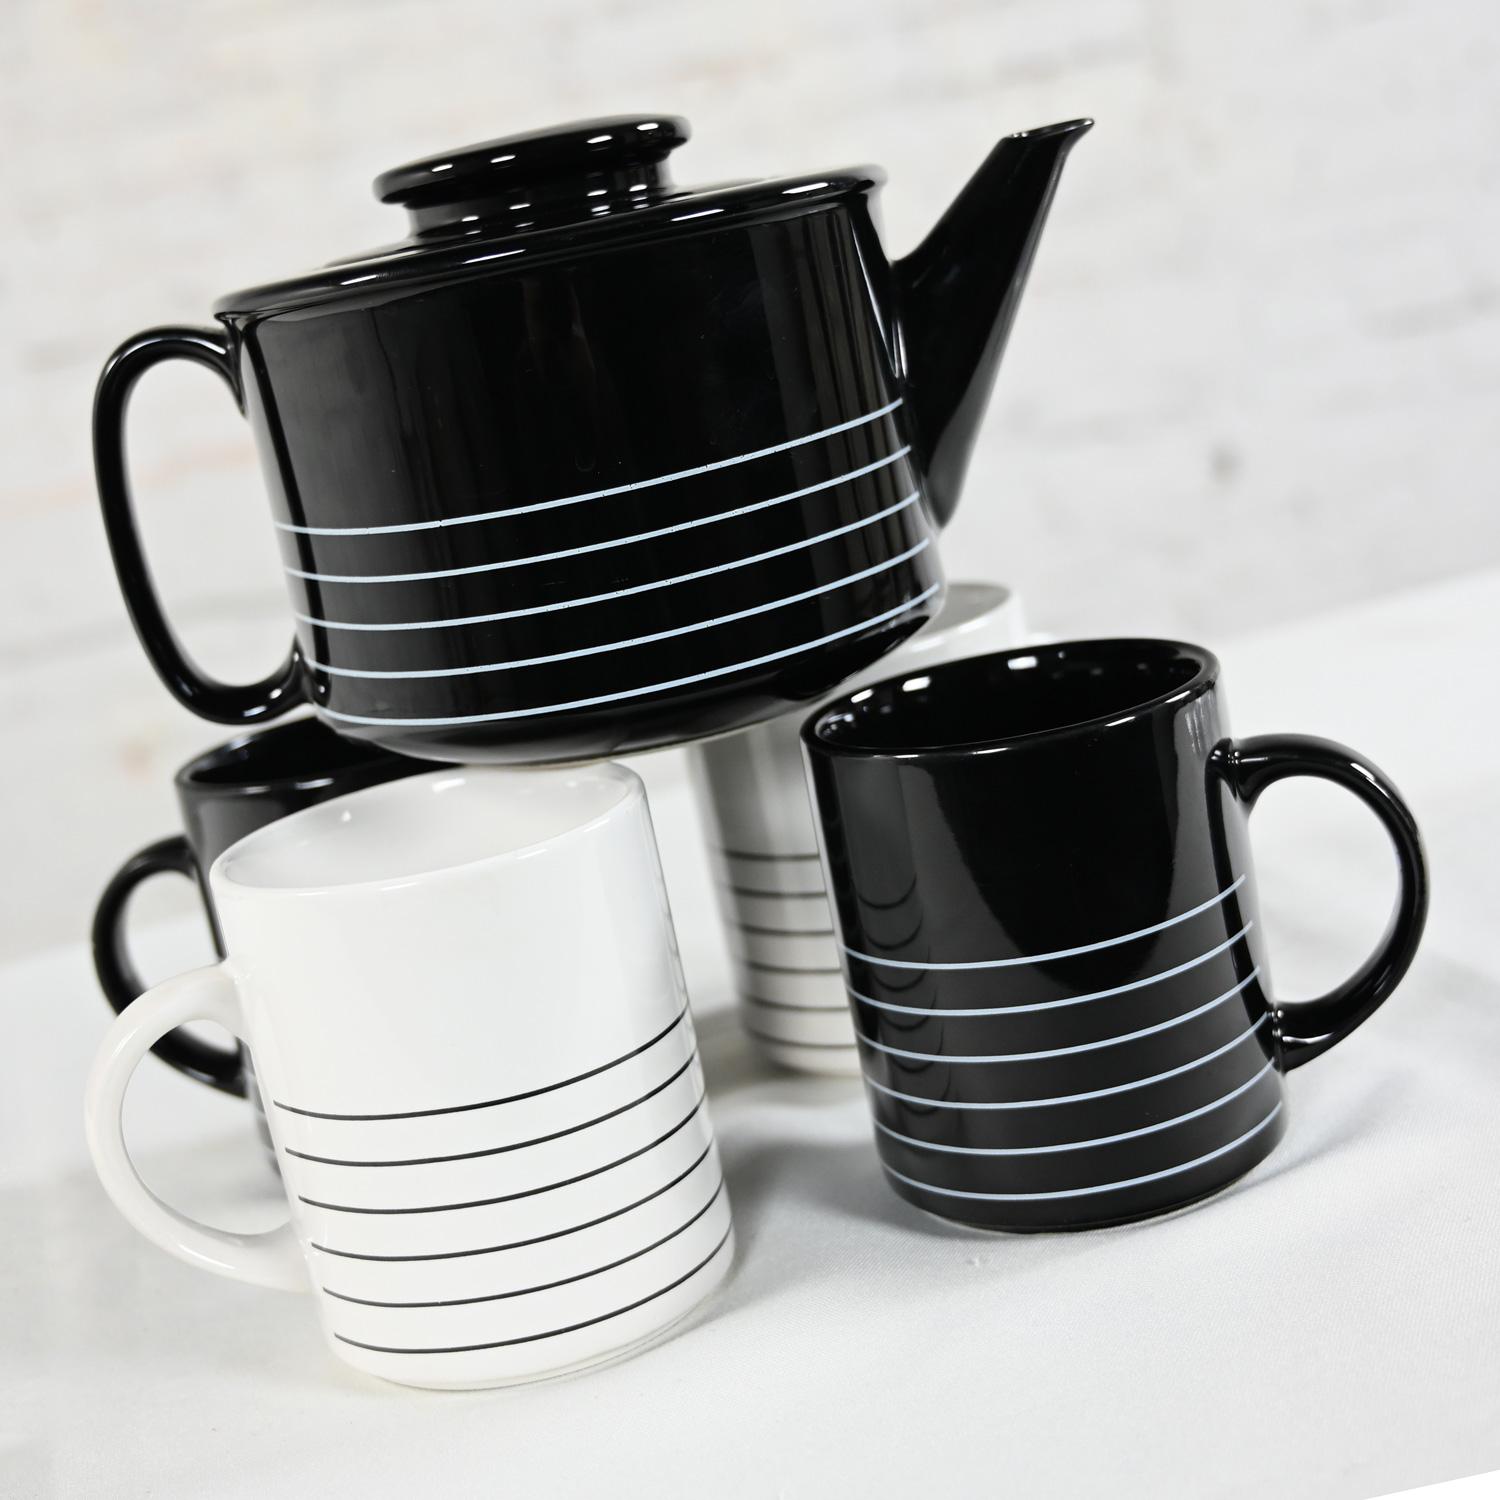 Marvelous 1982 Modern to Postmodern Copco black & white glazed ceramic lidded teapot, 2 white mugs with black stripes, and 2 black mugs with white stripes, designed by Sam Lebowitz.  Beautiful condition, keeping in mind that this is vintage and not